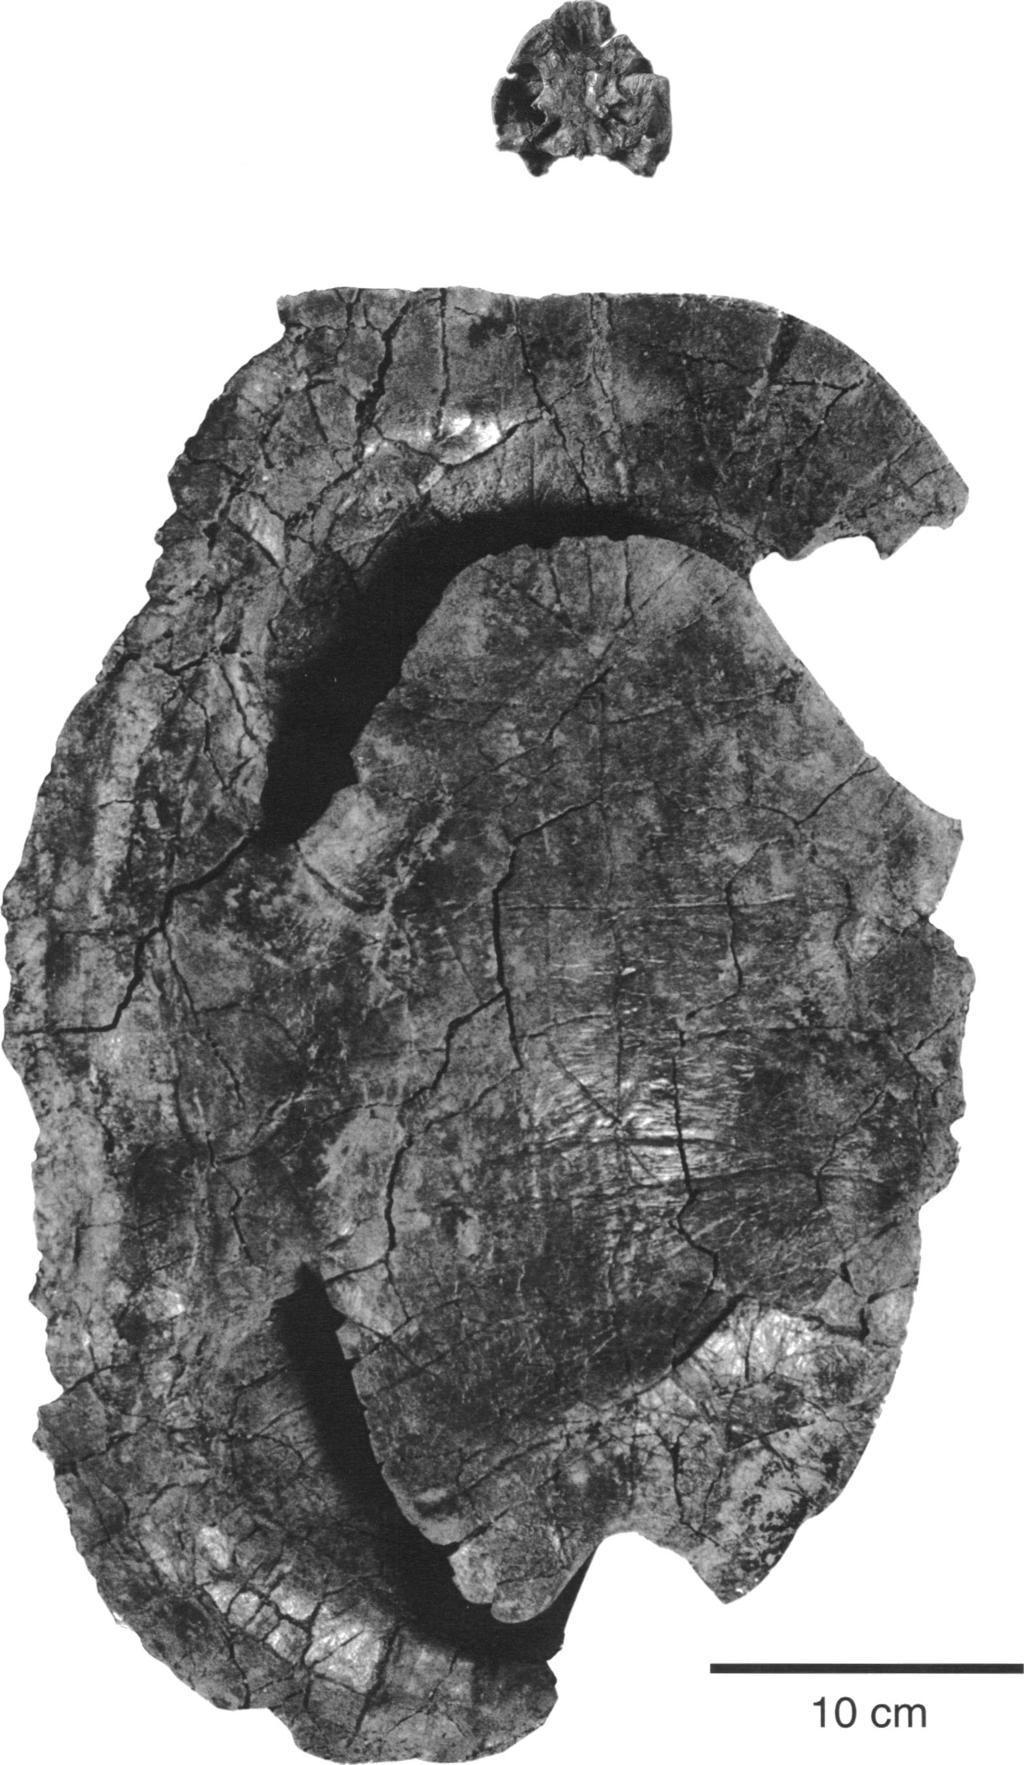 1998 TONG ET AL.: FOXEMYS 5 Fig. 2. Foxemys mechinorum, n. gen., n. sp. Skull and plastron (holotype MD t 10) in ventral view. provinciale, although there are significant differences (table 1).